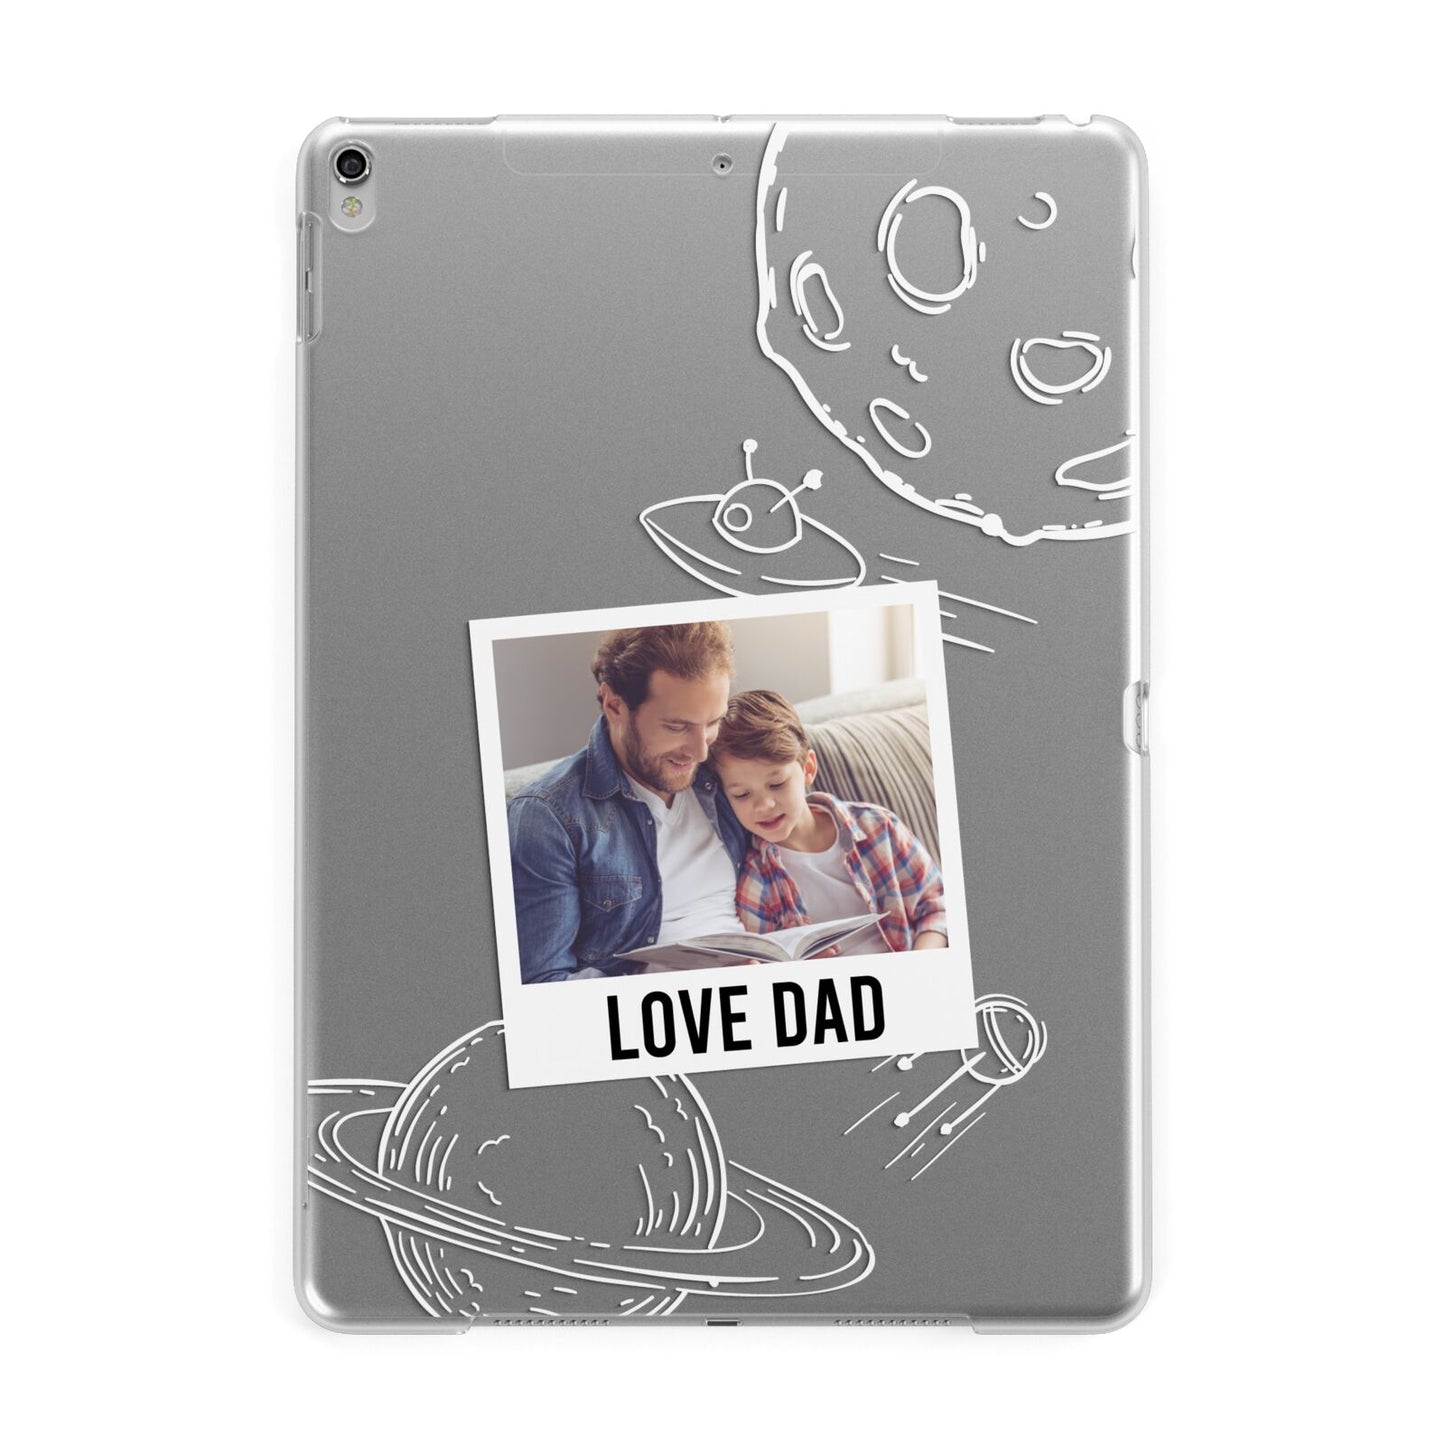 Personalised From Dad Photo Apple iPad Silver Case